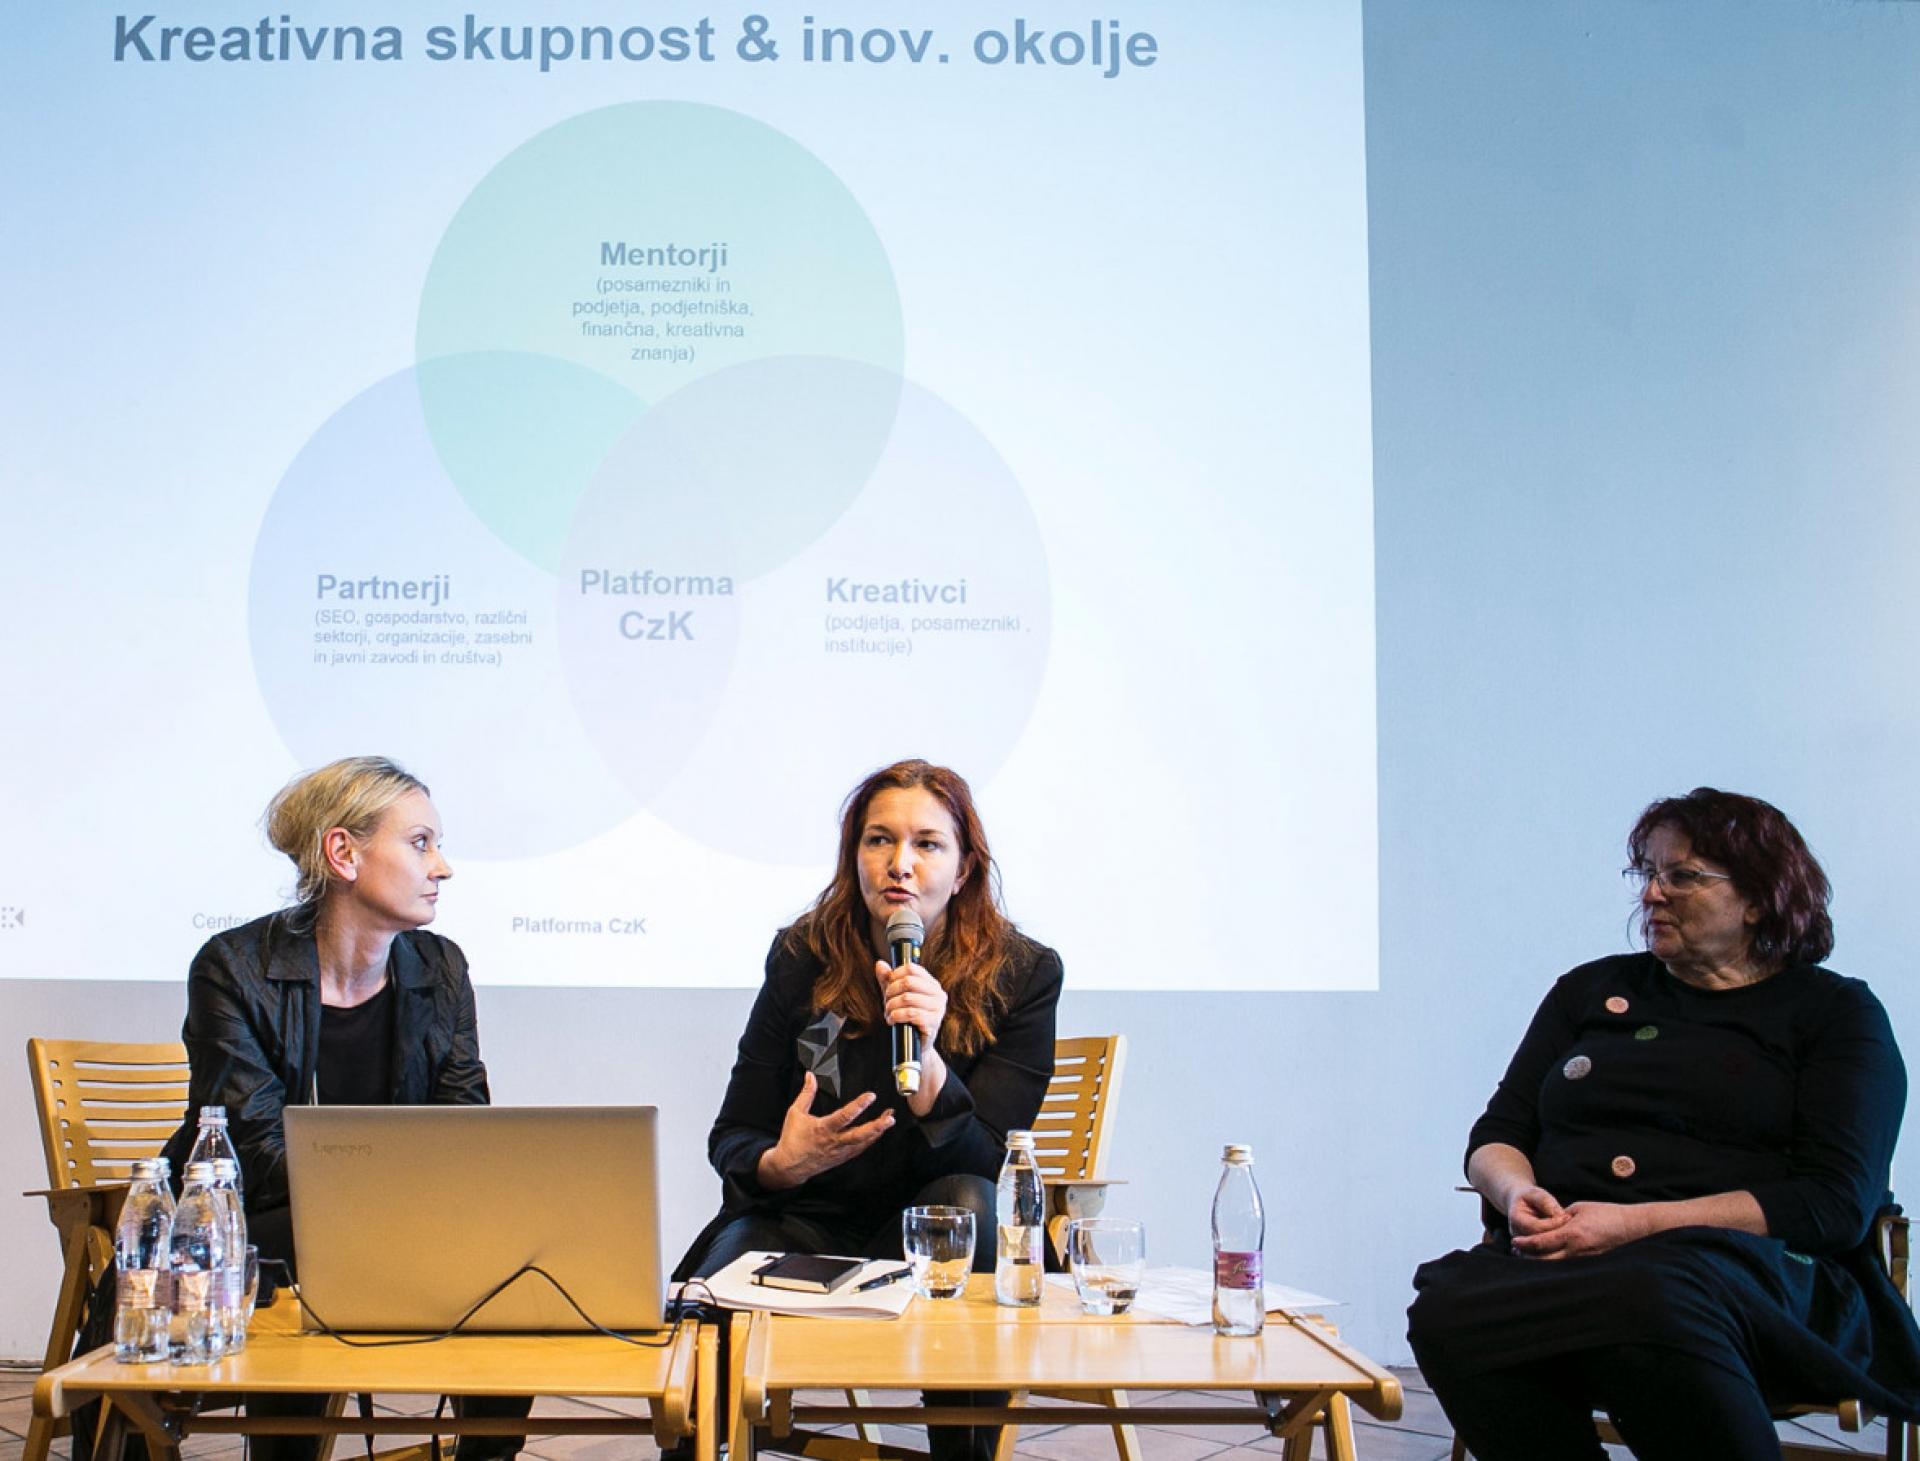 Presentation of the Ministry of Culture's public call for "Encouragement of creative cultural industries - Center for Creativity 2019" with Anja Zorko, Mika Cimolini and Biserka Močnik.